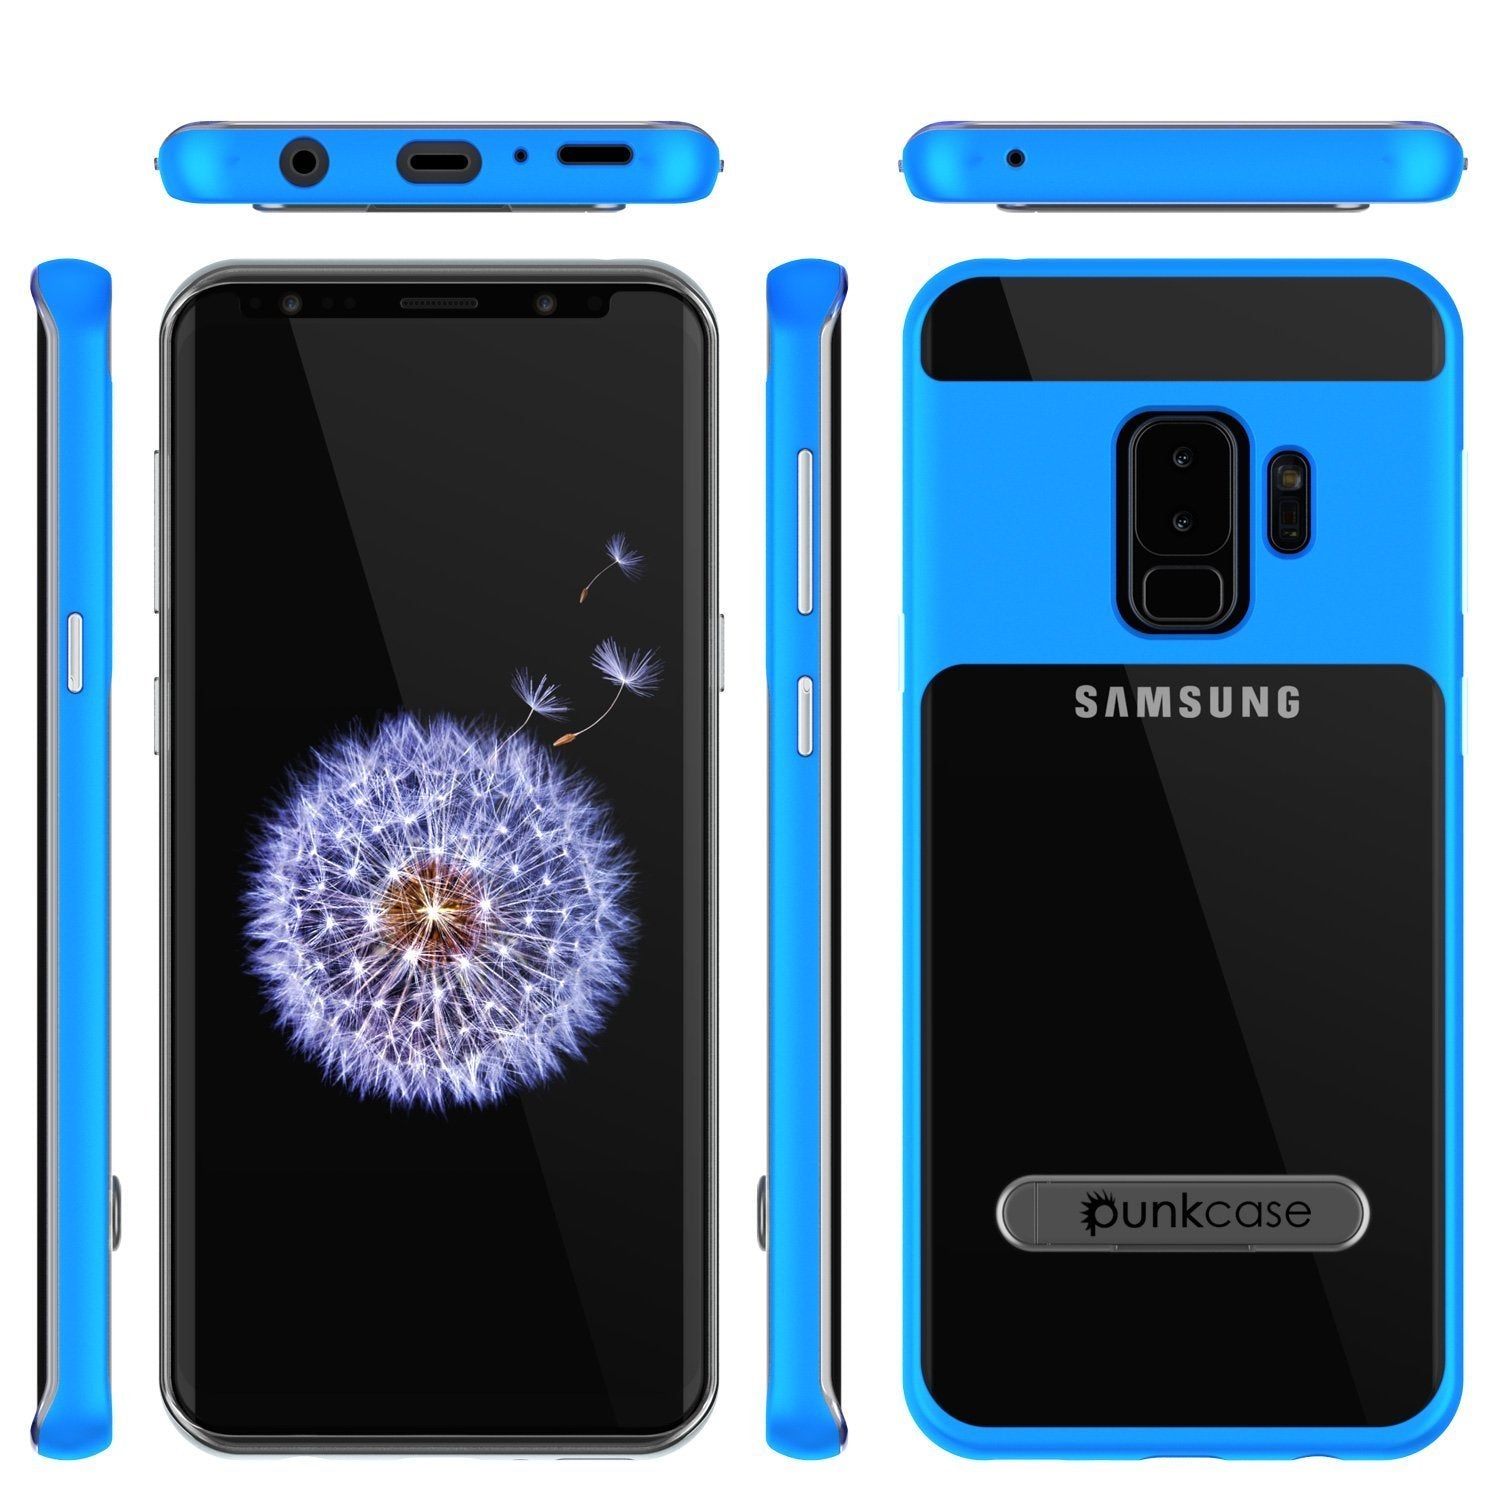 Galaxy S9+ Plus Case, PUNKcase [LUCID 3.0 Series] [Slim Fit] [Clear Back] Armor Cover w/ Integrated Kickstand, Anti-Shock System & PUNKSHIELD Screen Protector for Samsung Galaxy S9+ Plus [Blue] - PunkCase NZ